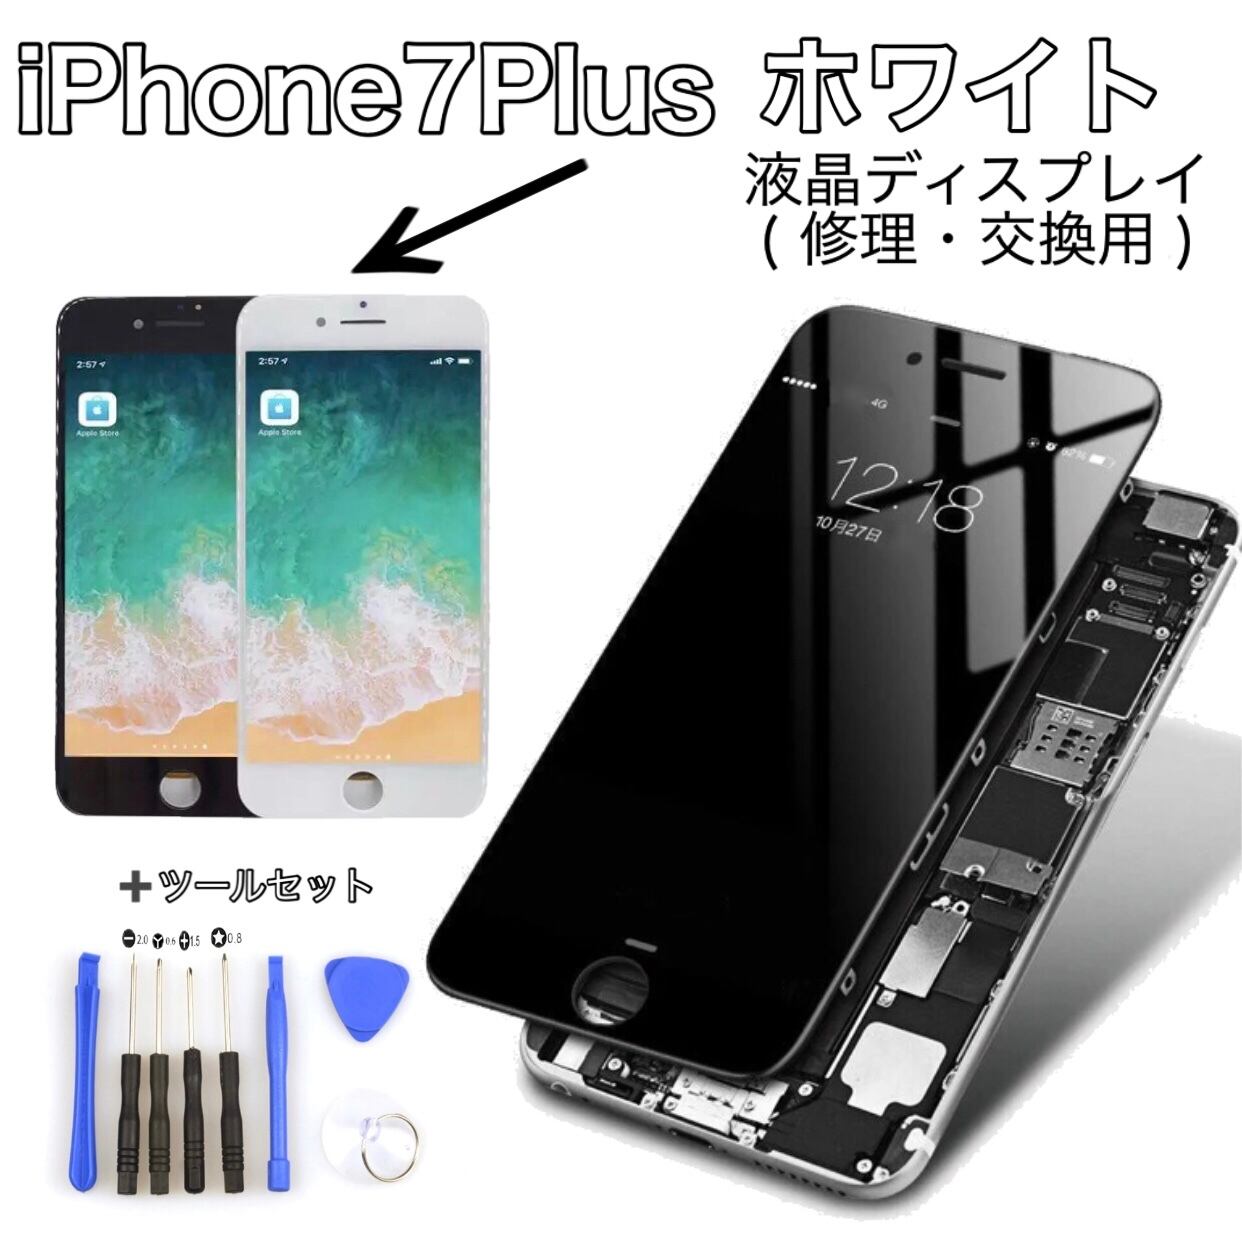 iPhone７Plus　交換用バッテリー